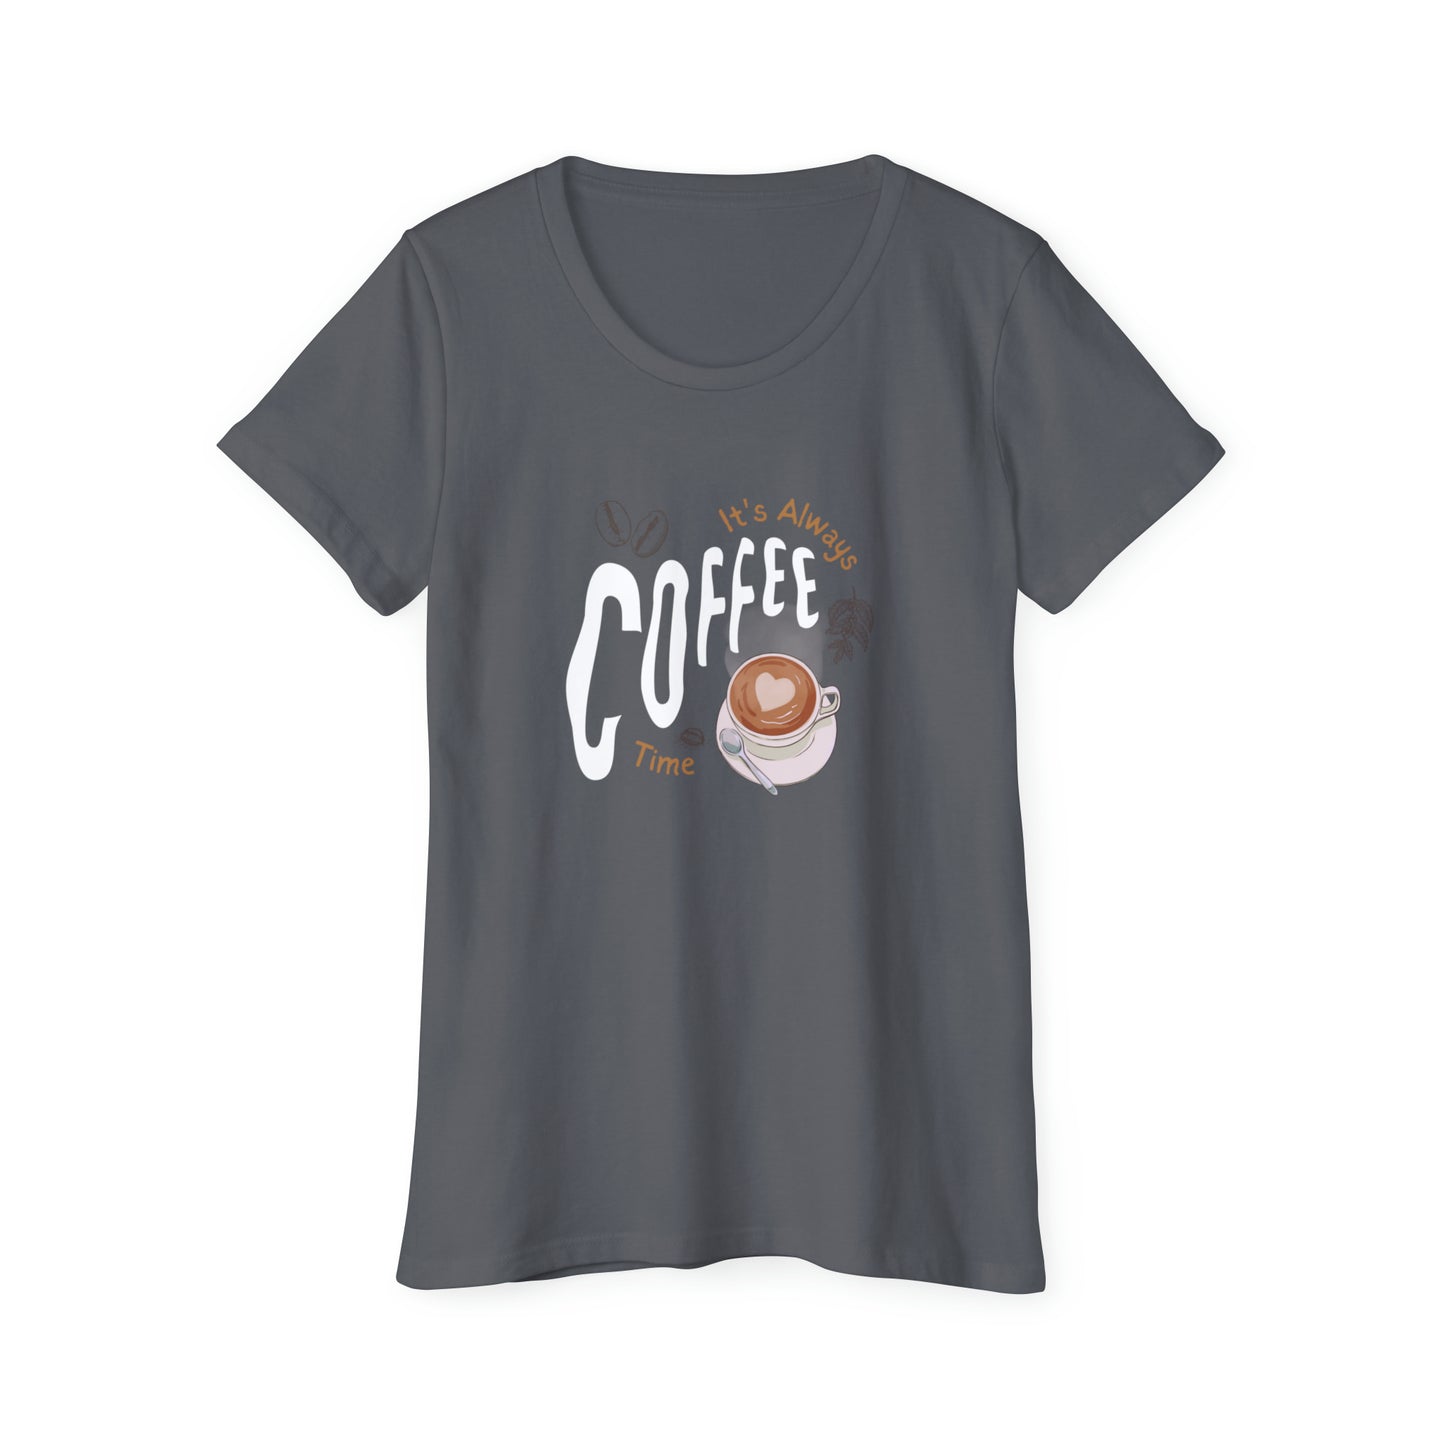 It's Always Coffee Time  Organic Cotton Graphic Tee for Women